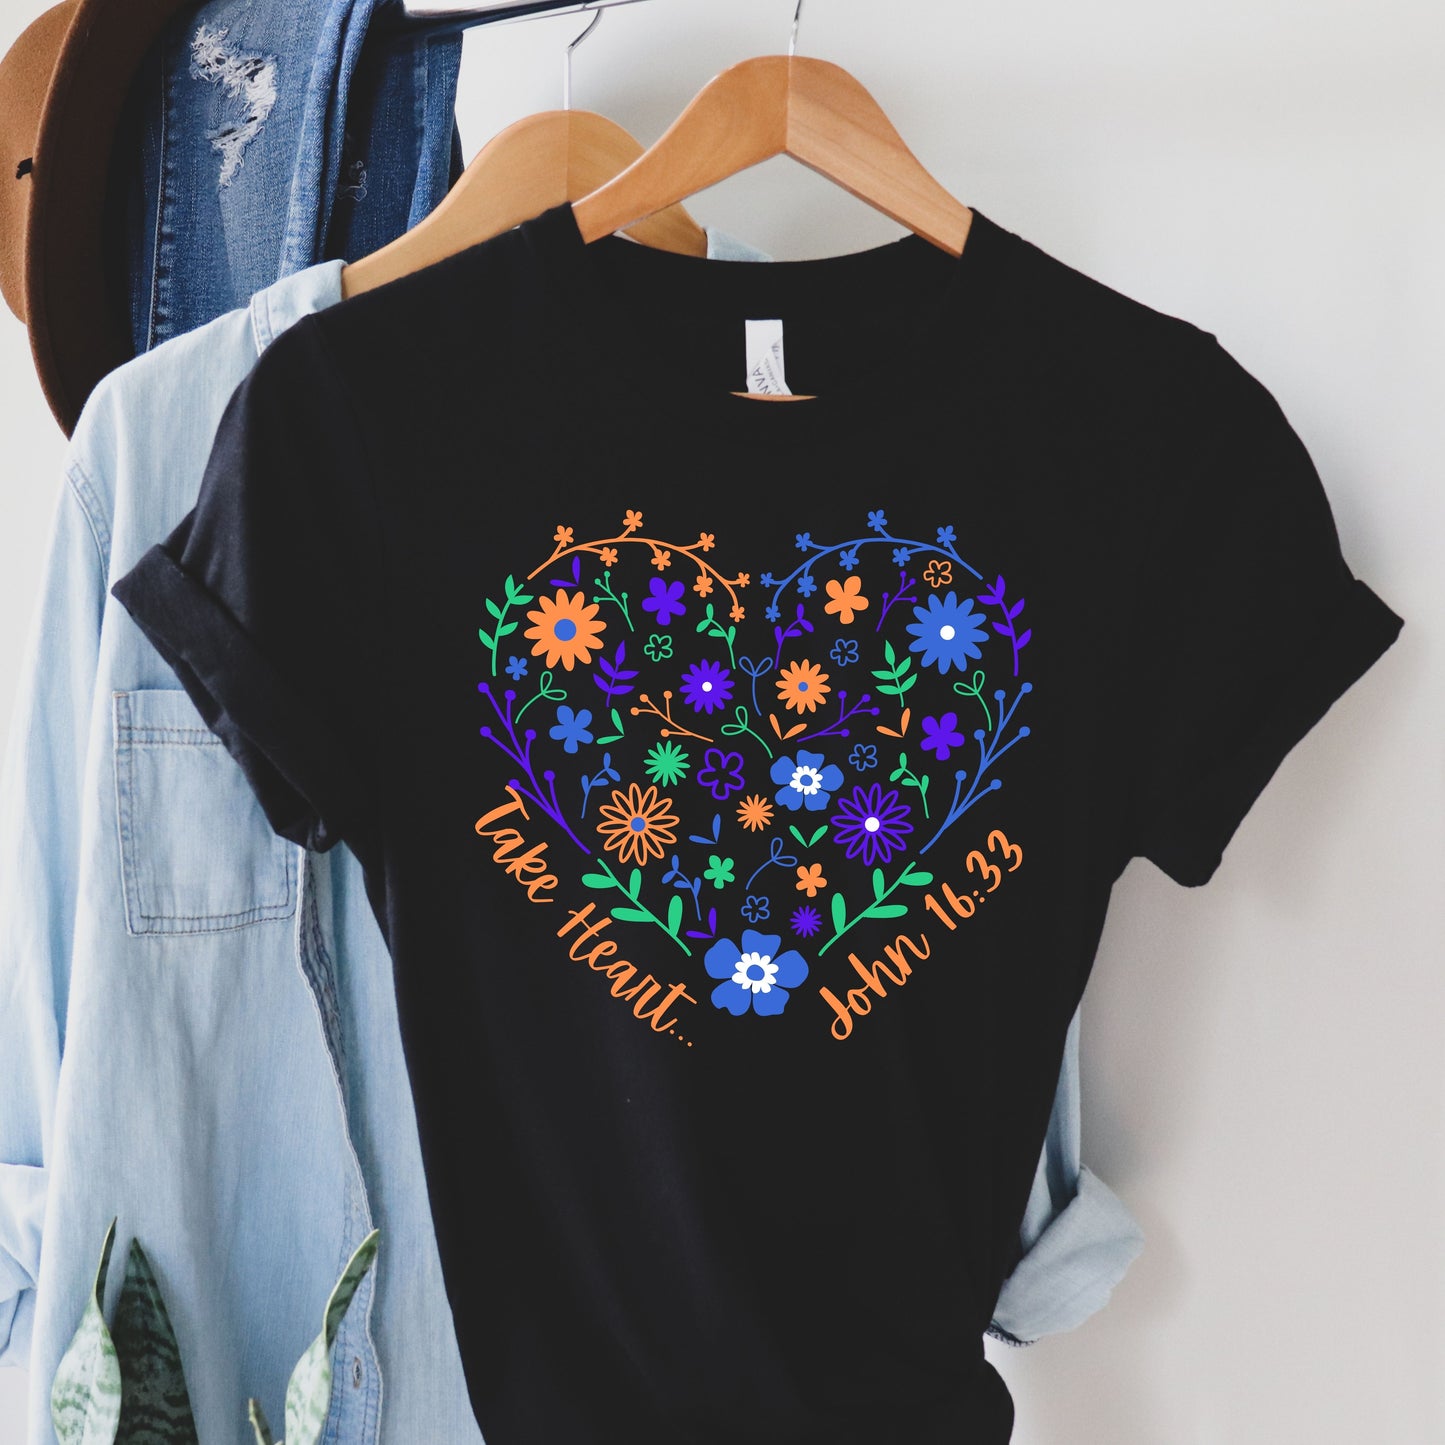 Take Heart Jersey Short Sleeve Tee, Inspirational T-Shirt, Religious T-Shirt, Gifts For Her, Gifts For Mom, Teacher Gifts, Heart With Flower